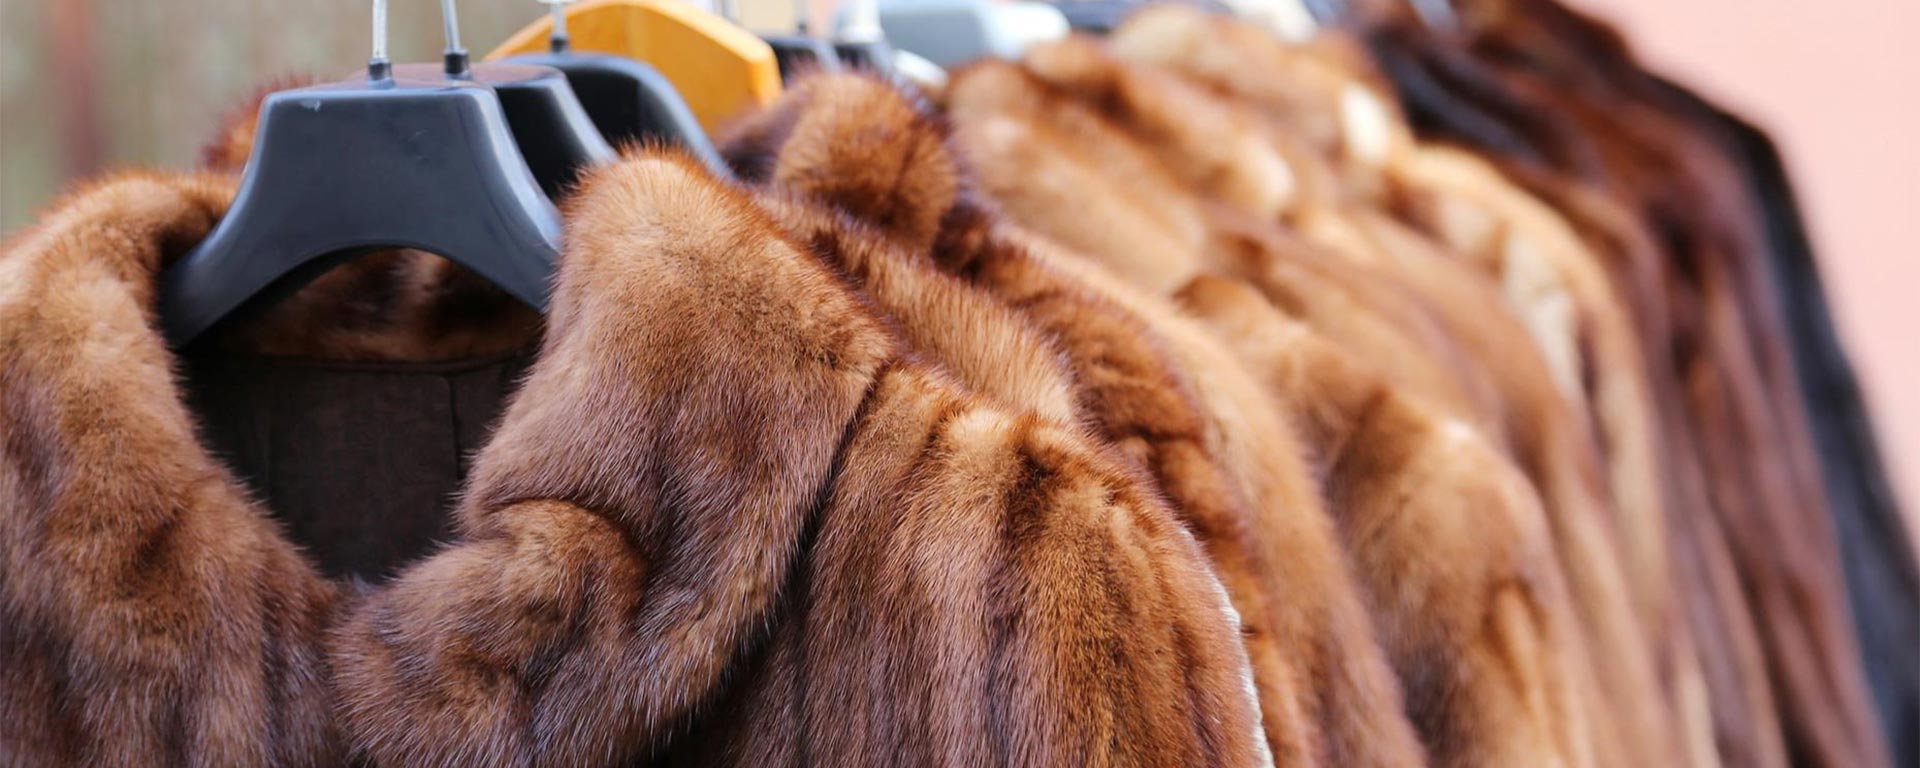 5 Simple Ways To Change The Look Of A Fur Coat - Gravity Magazine